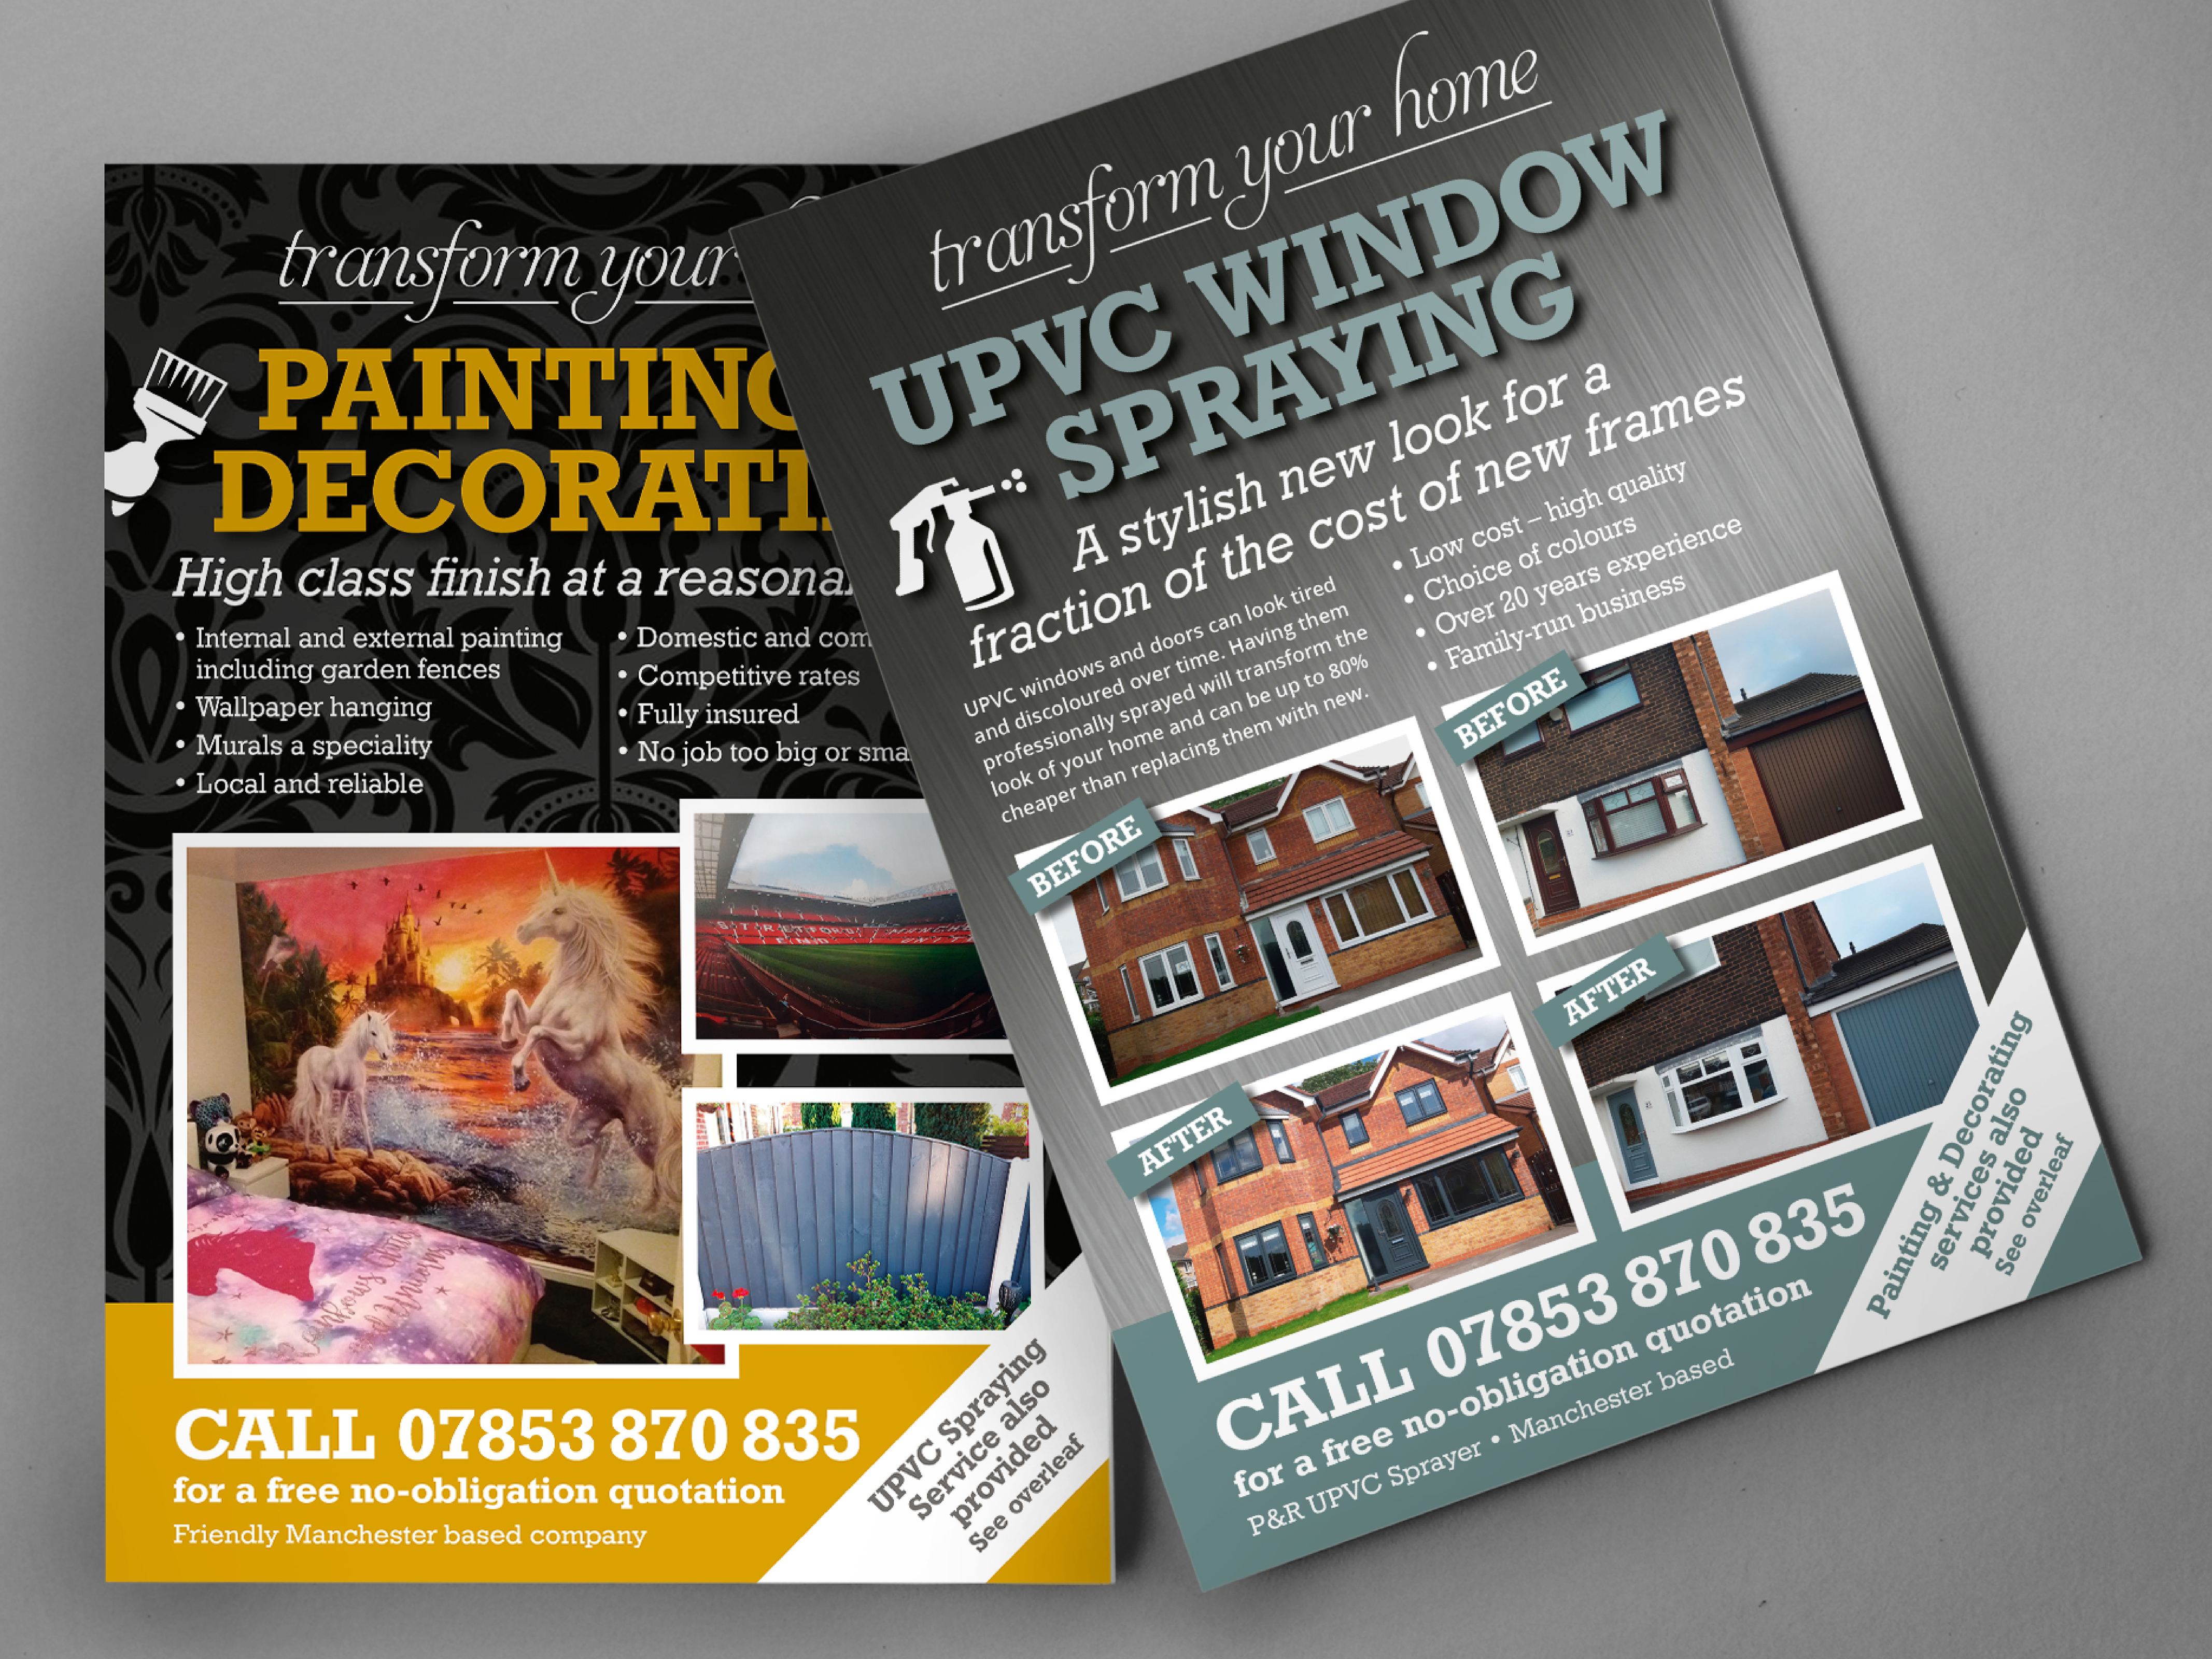 Design and printing of a leaflet promoting a UPVC spraying service in Dukinfield, Tameside.